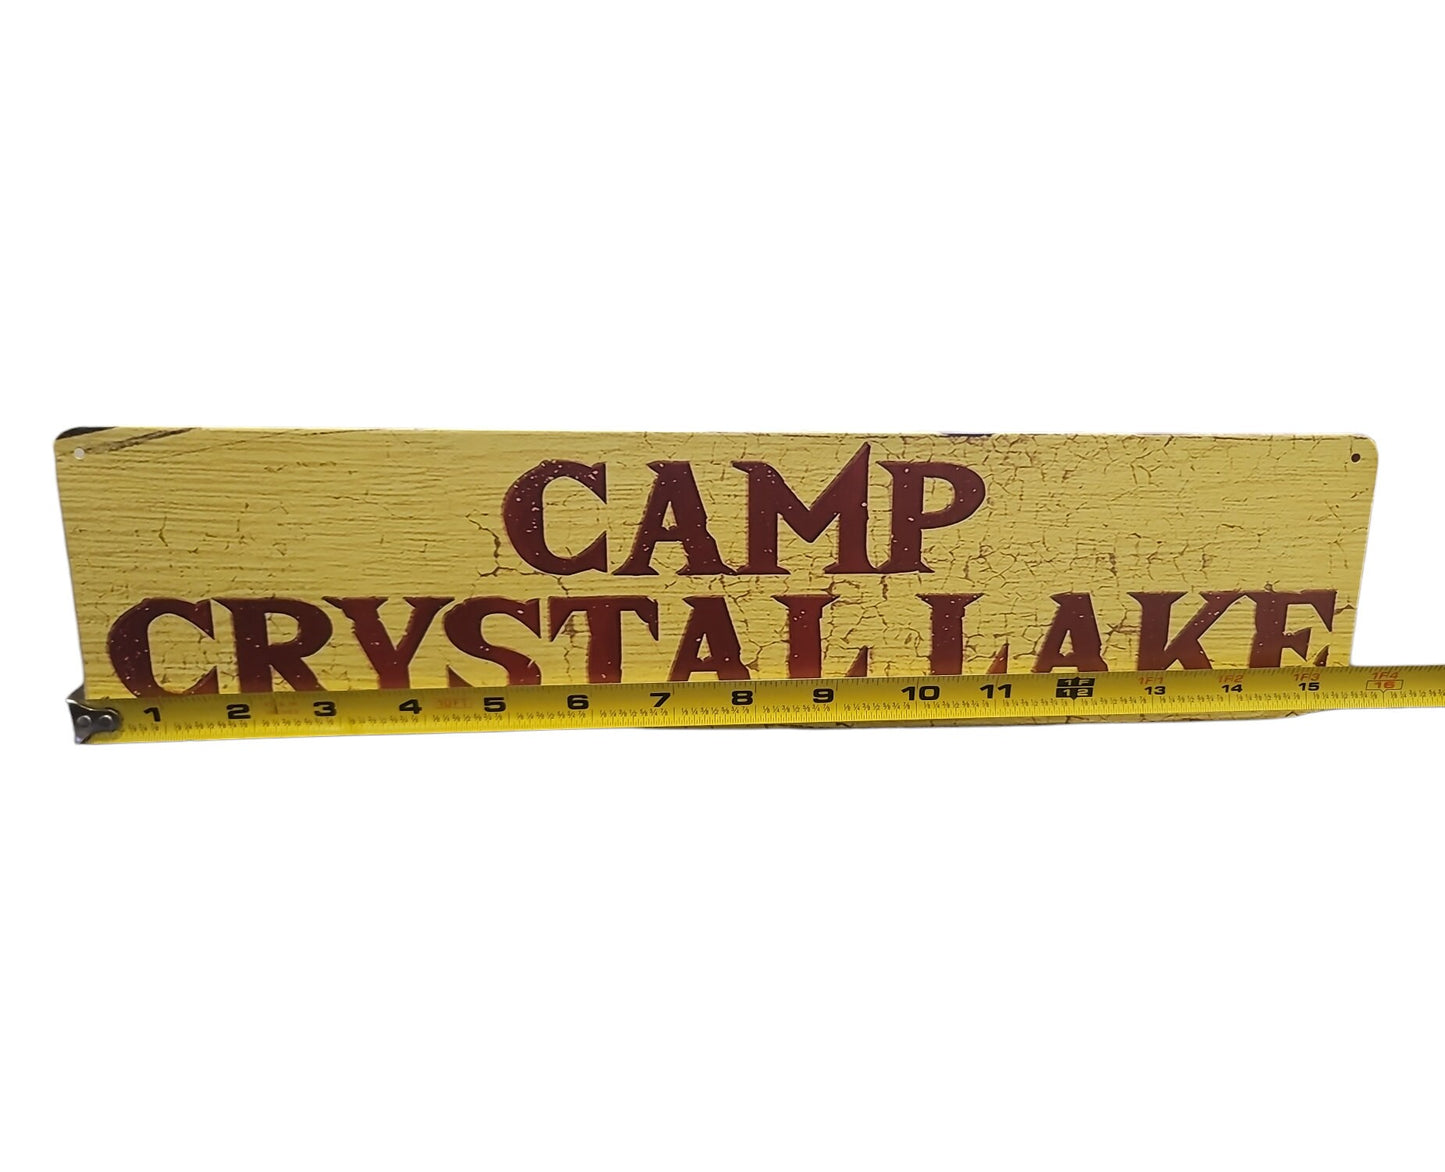 Camp crystal lake metal tin sign Friday the 13th Jason Voorhees horror movie